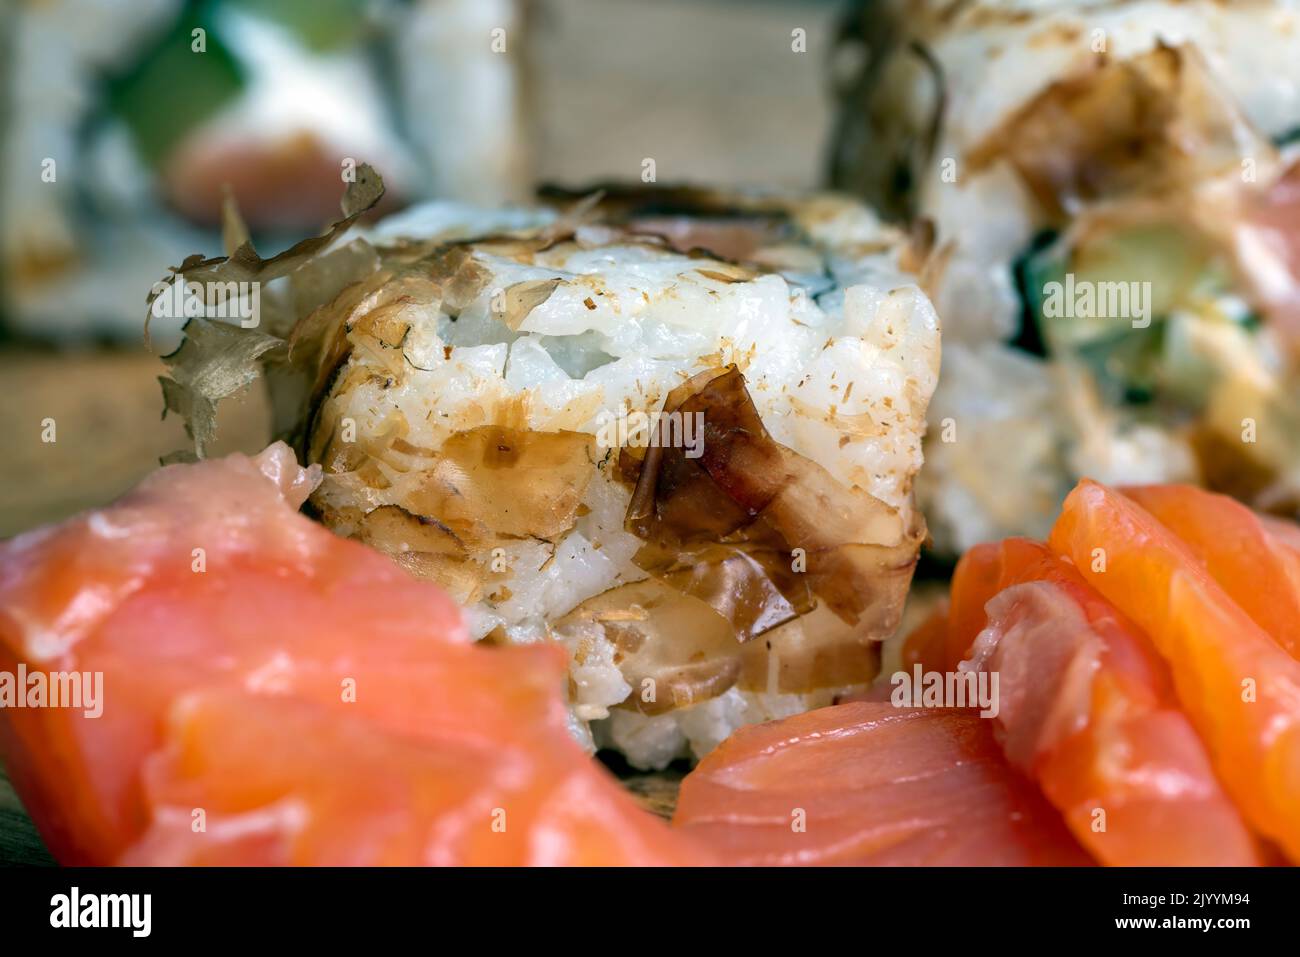 sushi with red salted fish and rice, Asian cuisine sushi of red raw fish with rice and other ingredients Stock Photo